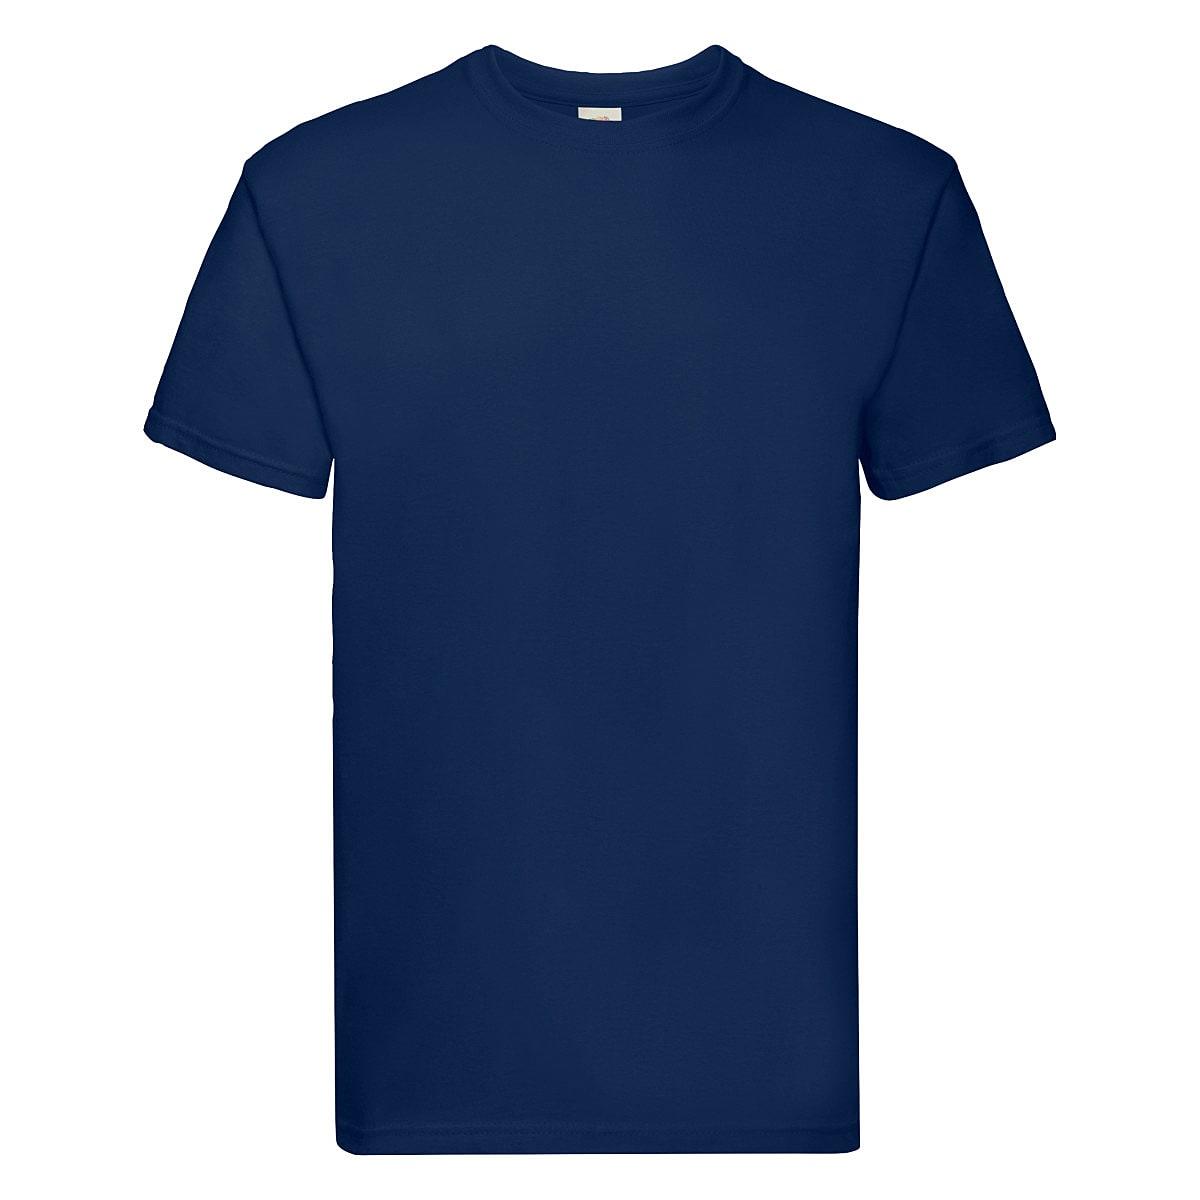 Fruit Of The Loom Super Premium T-Shirt in Navy Blue (Product Code: 61044)